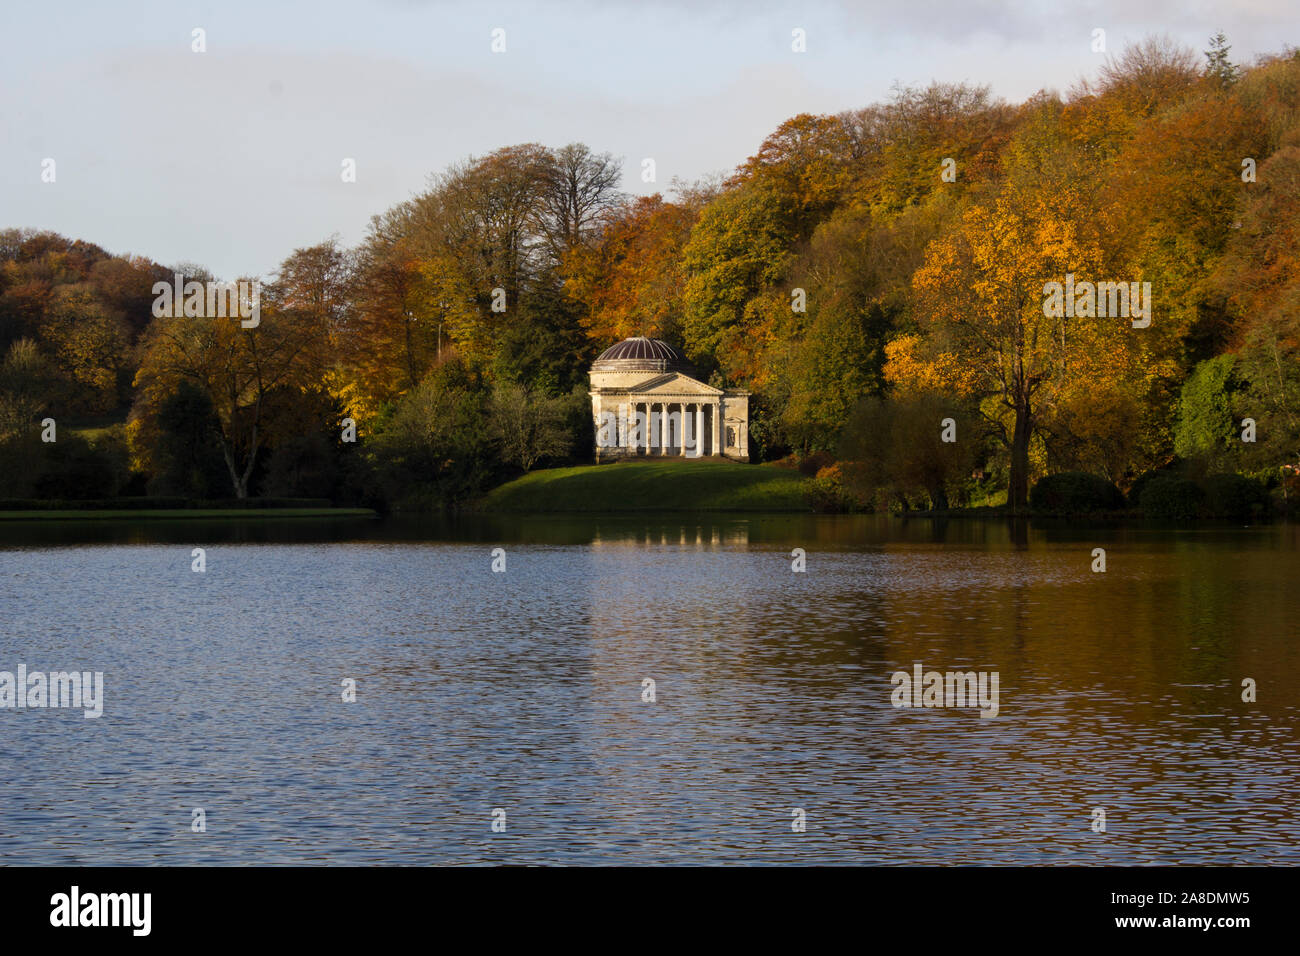 Stourhead stone pavilion. A wonderful folly in the Georgian landscaped gardens of Stourhead. The lake in front and the woods behind. Autumn and sunny Stock Photo